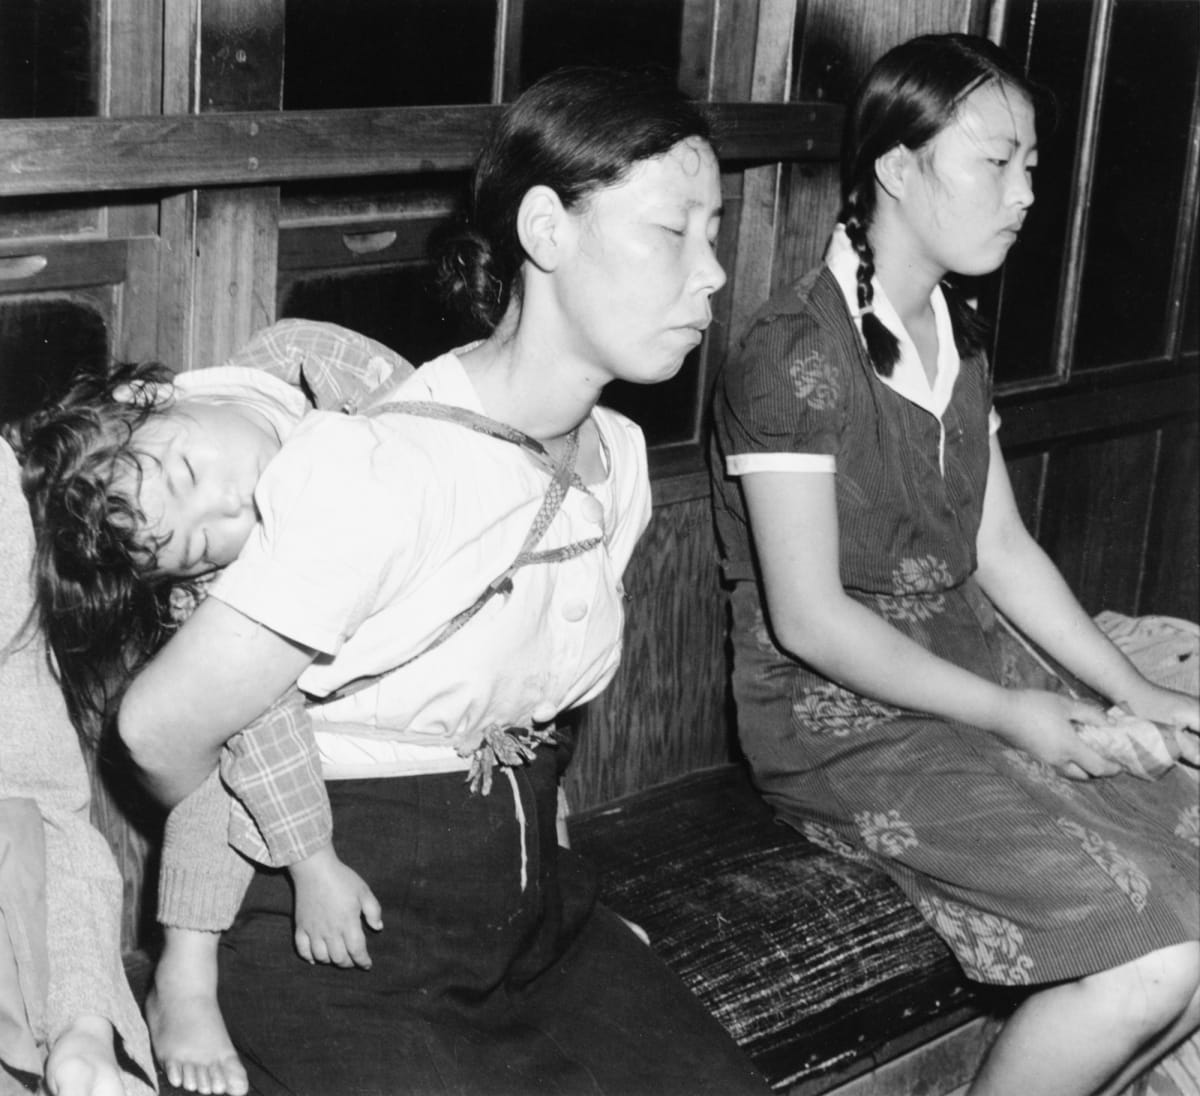 Tokyo, Japan 1948 by Edward R. Miller  Image: Two Japanese people on old wooden subway seat, child on one persons back sleeping